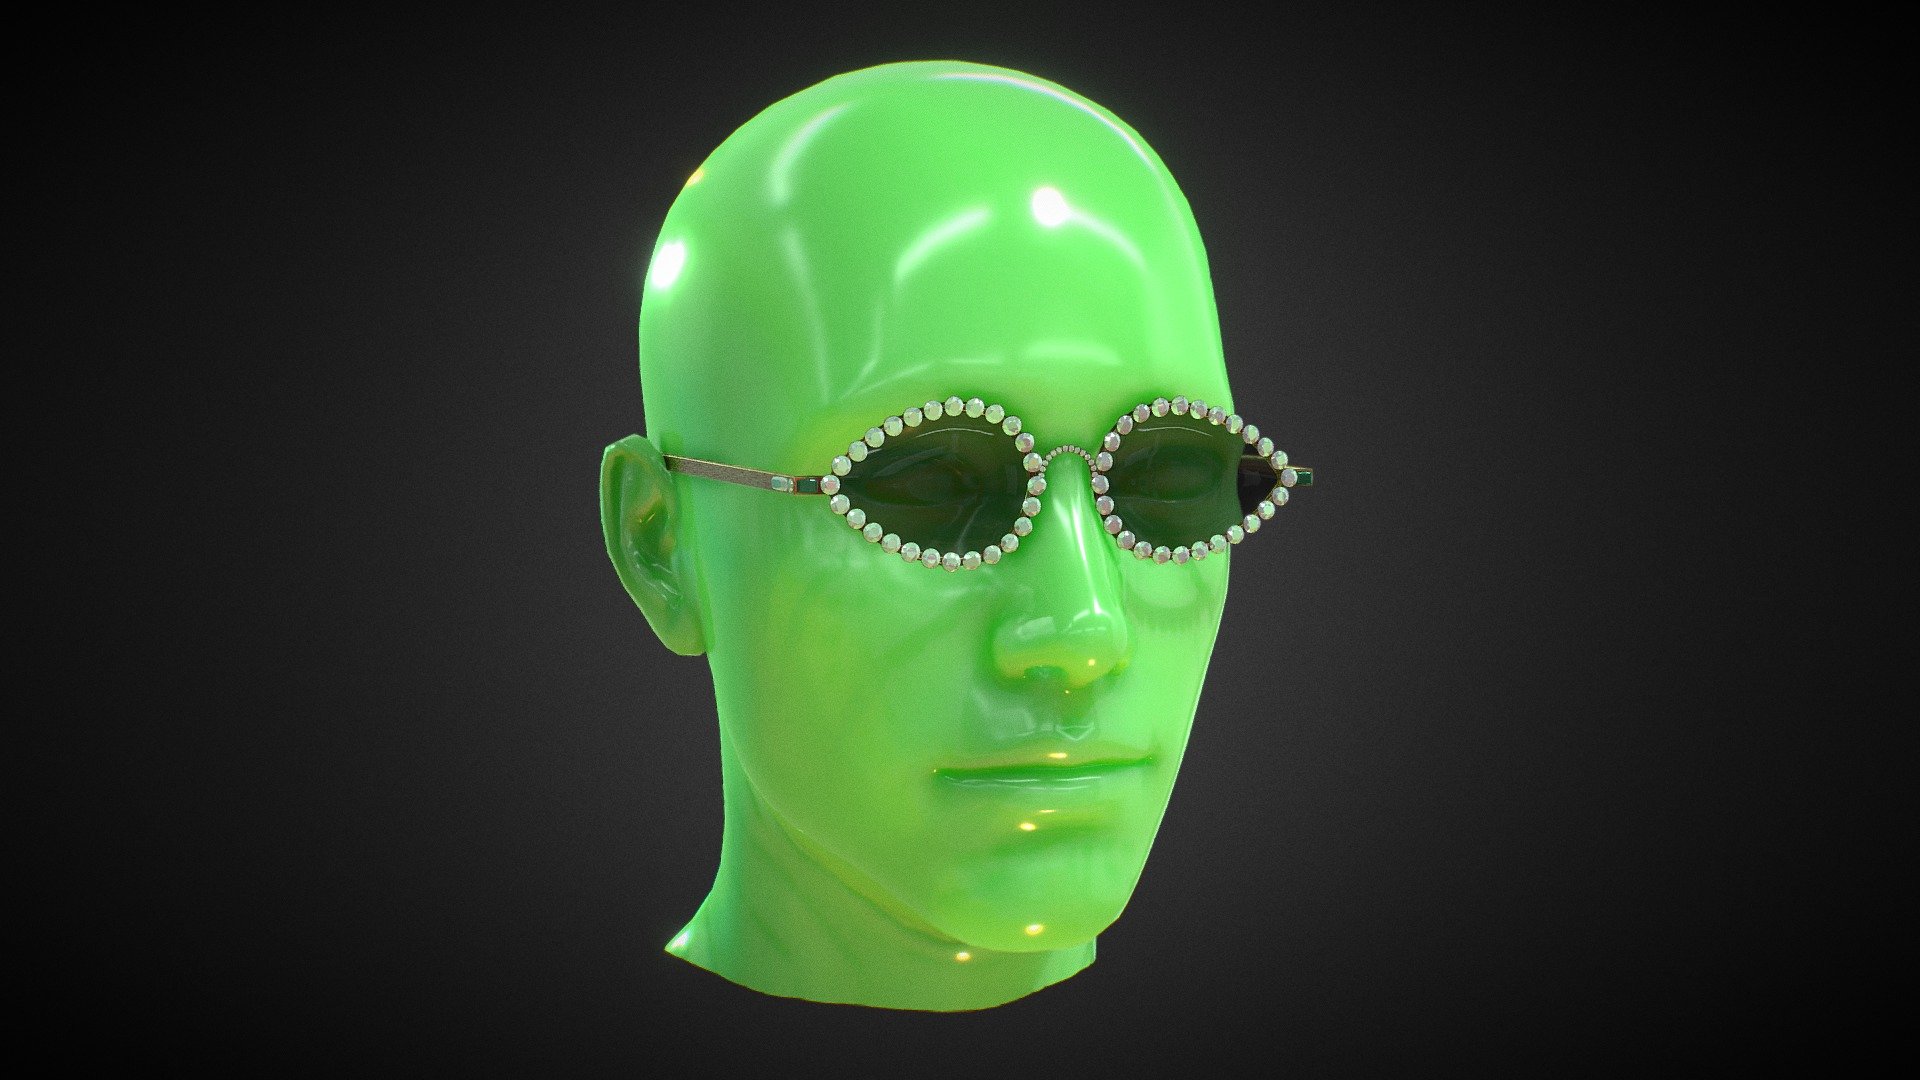 Inspired by Pharrell's collaboration with Tiffany &amp; Co. They made a pair of diamond sunglasses and this model is a close replica of that.

-Website: https://tiko.vip/

-Patreon: https://www.patreon.com/tiko - Get free CC0 models, patrons get paid &amp; exclusive models

-Instagram: https://www.instagram.com/tikodev/

-Youtube: https://goo.gl/1tFYNA

-Reddit: https://www.reddit.com/r/ENDthegame/

-Itch.io (Games by me): https://endthegame.itch.io/end

-NFT’s: opensea.io/Tiko - Designer Sunglasses 3 - Buy Royalty Free 3D model by Tiko (@tikoavp) 3d model